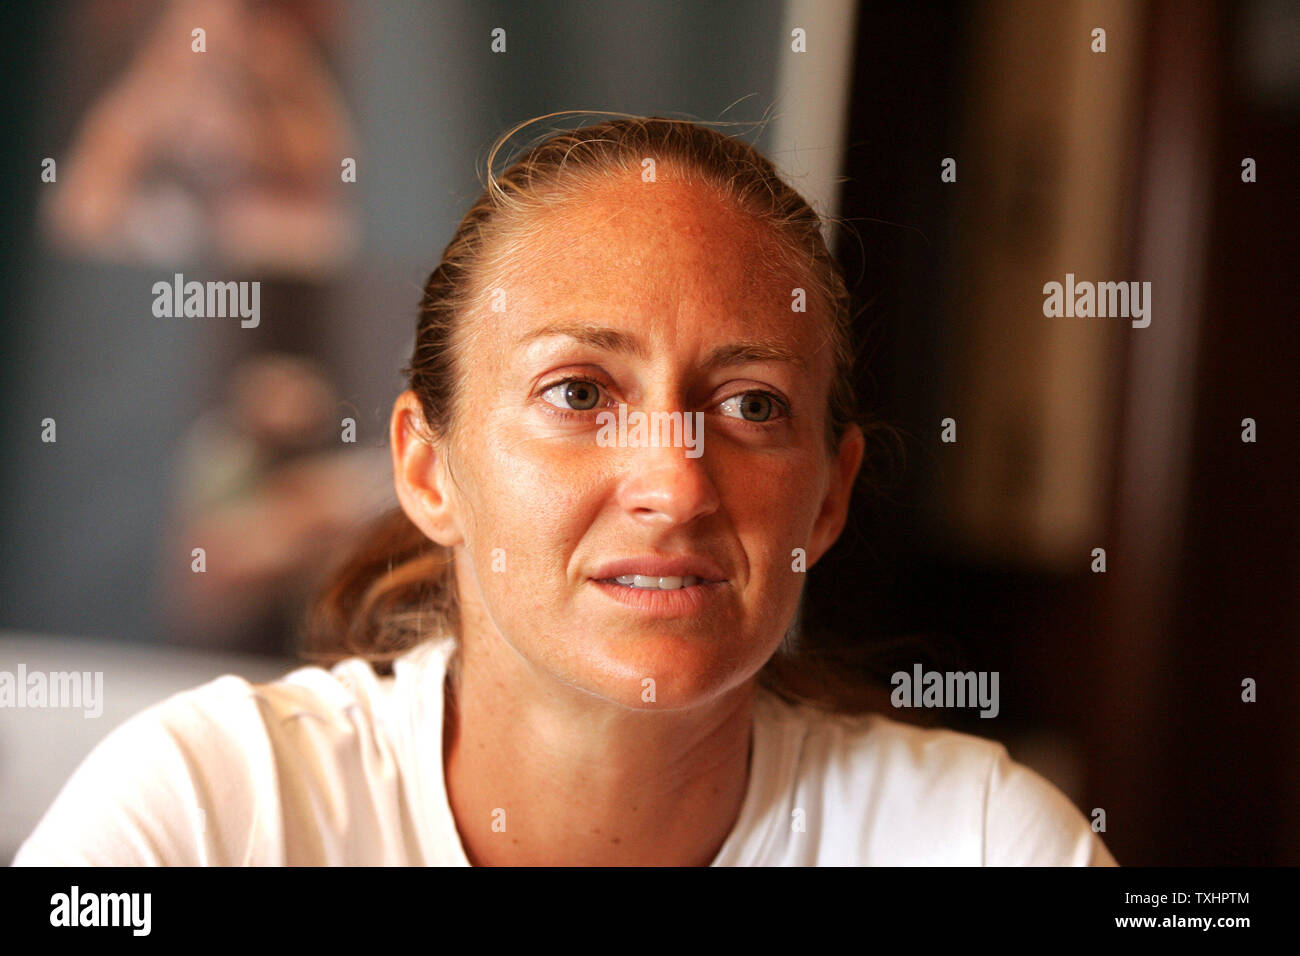 Mary Pierce of France, 2005 French Open finalist,  answers questions during interviews on media day at Acura Classic women's tennis tournament, Carlsbad, California, USA on August 01, 2005.  Major seeded players Maria Sharapova and Serena Williams have withdrawn due to injuries. While Mary Pierce, Lindsay Davenport and Kim Clijsters begin competing this week with finals on August 7, 2005. (UPI Photo/Tom Theobald) Stock Photo